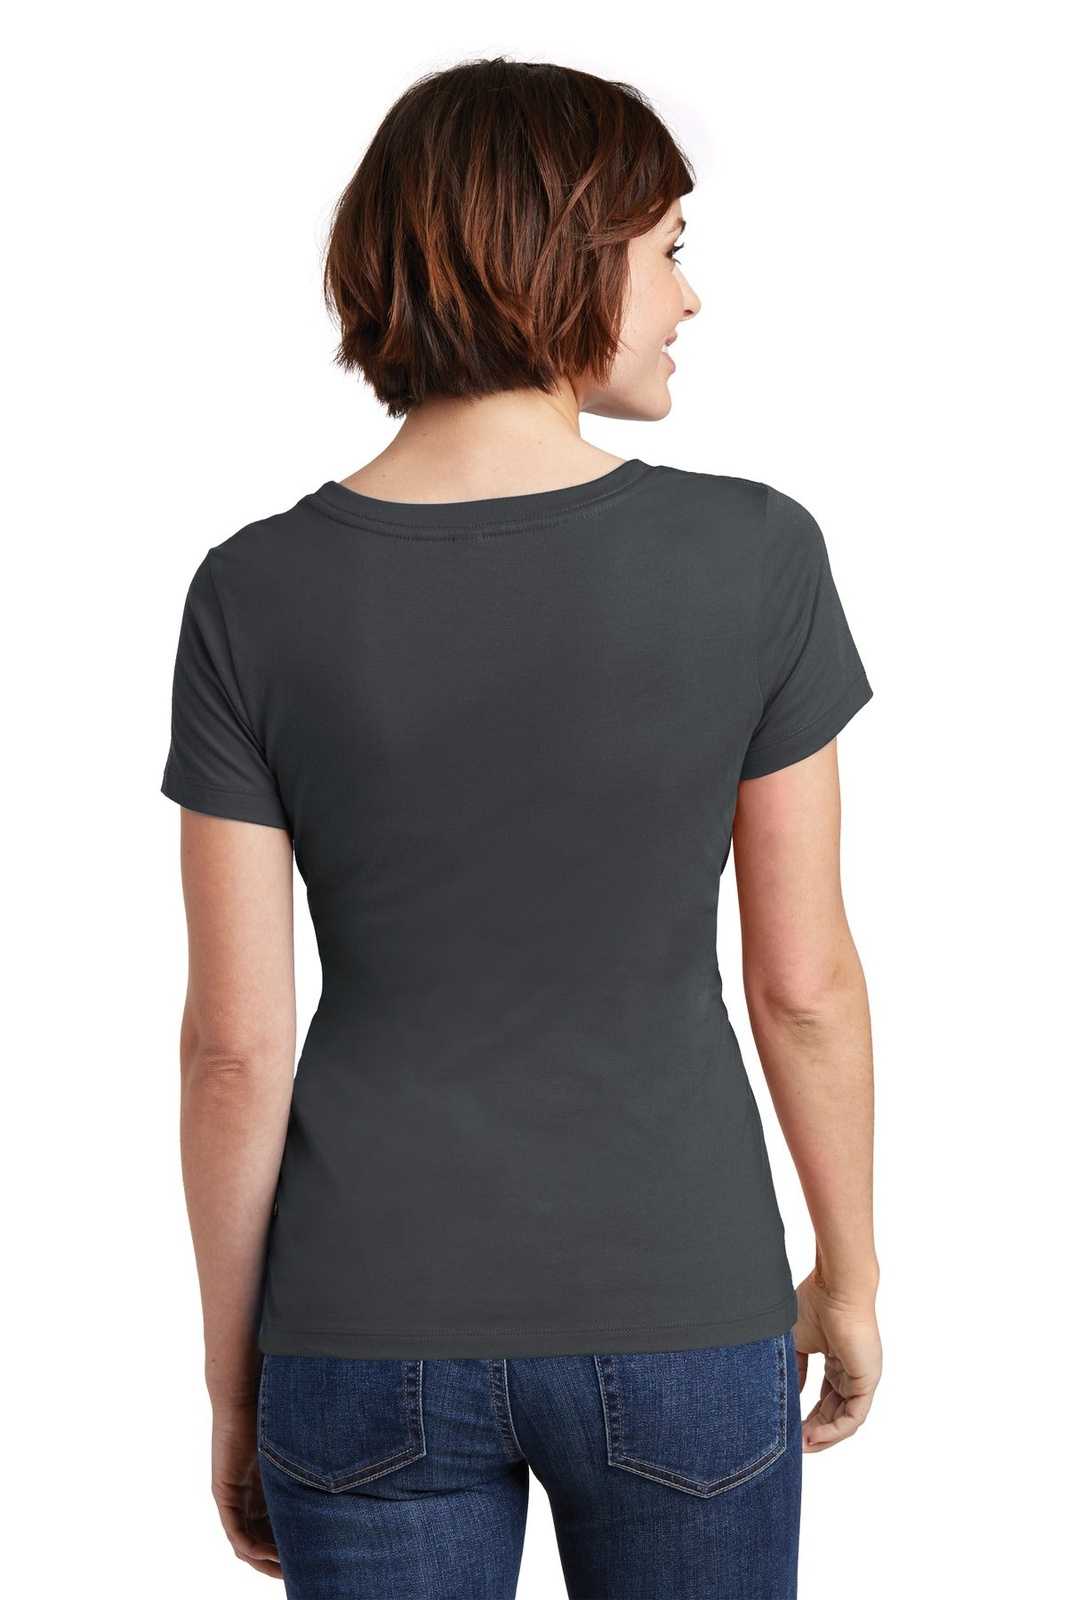 District DM106L Women's Perfect Weight Scoop Tee - Charcoal - HIT a Double - 1